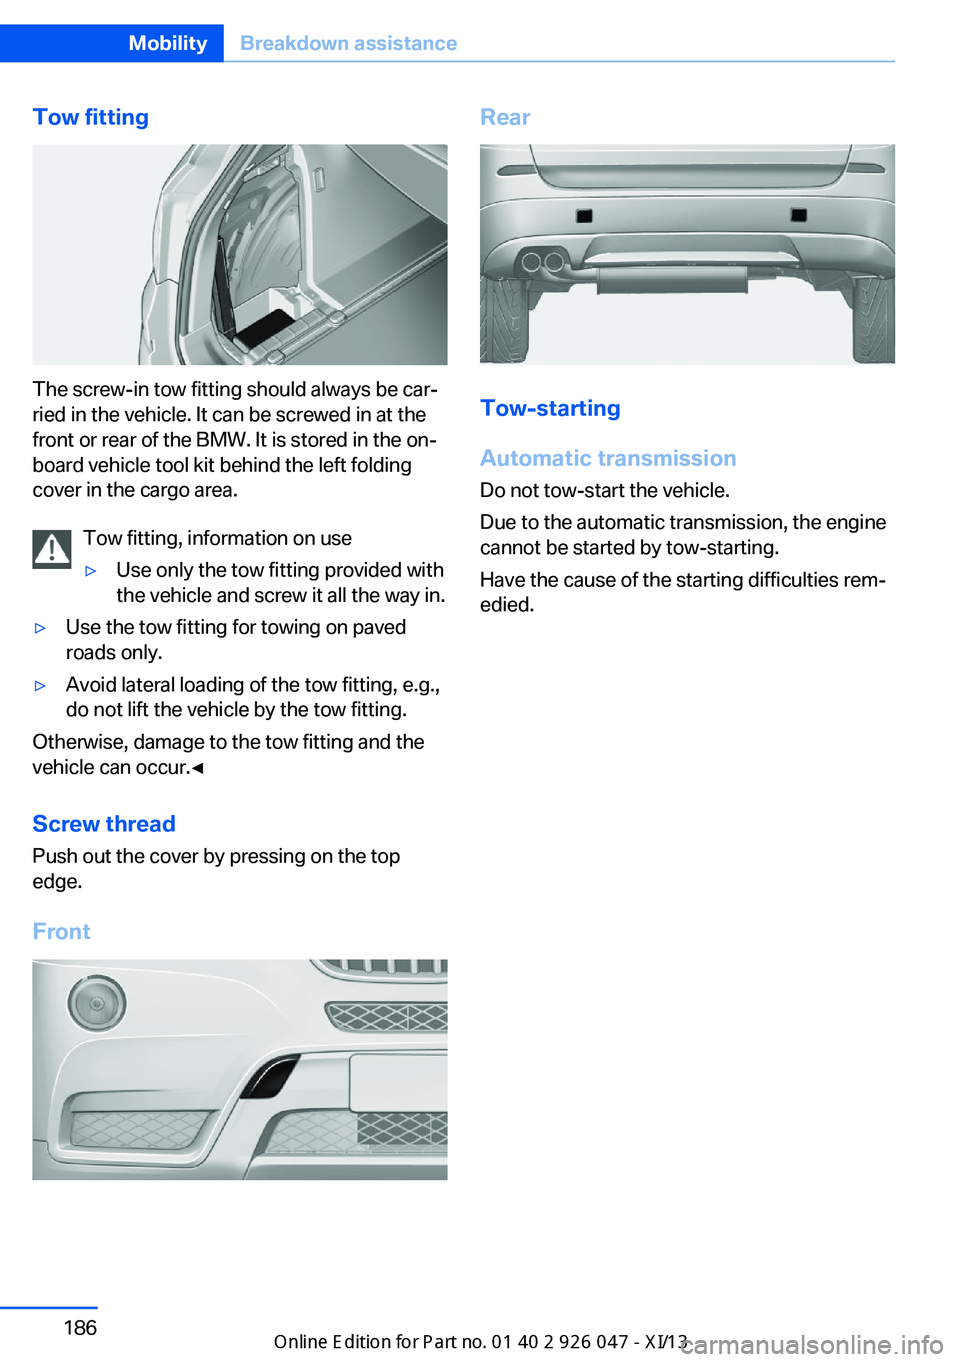 BMW X3 2013 F25 Owners Manual Tow fitting
The screw-in tow fitting should always be car‐
ried in the vehicle. It can be screwed in at the
front or rear of the BMW. It is stored in the on‐
board vehicle tool kit behind the left